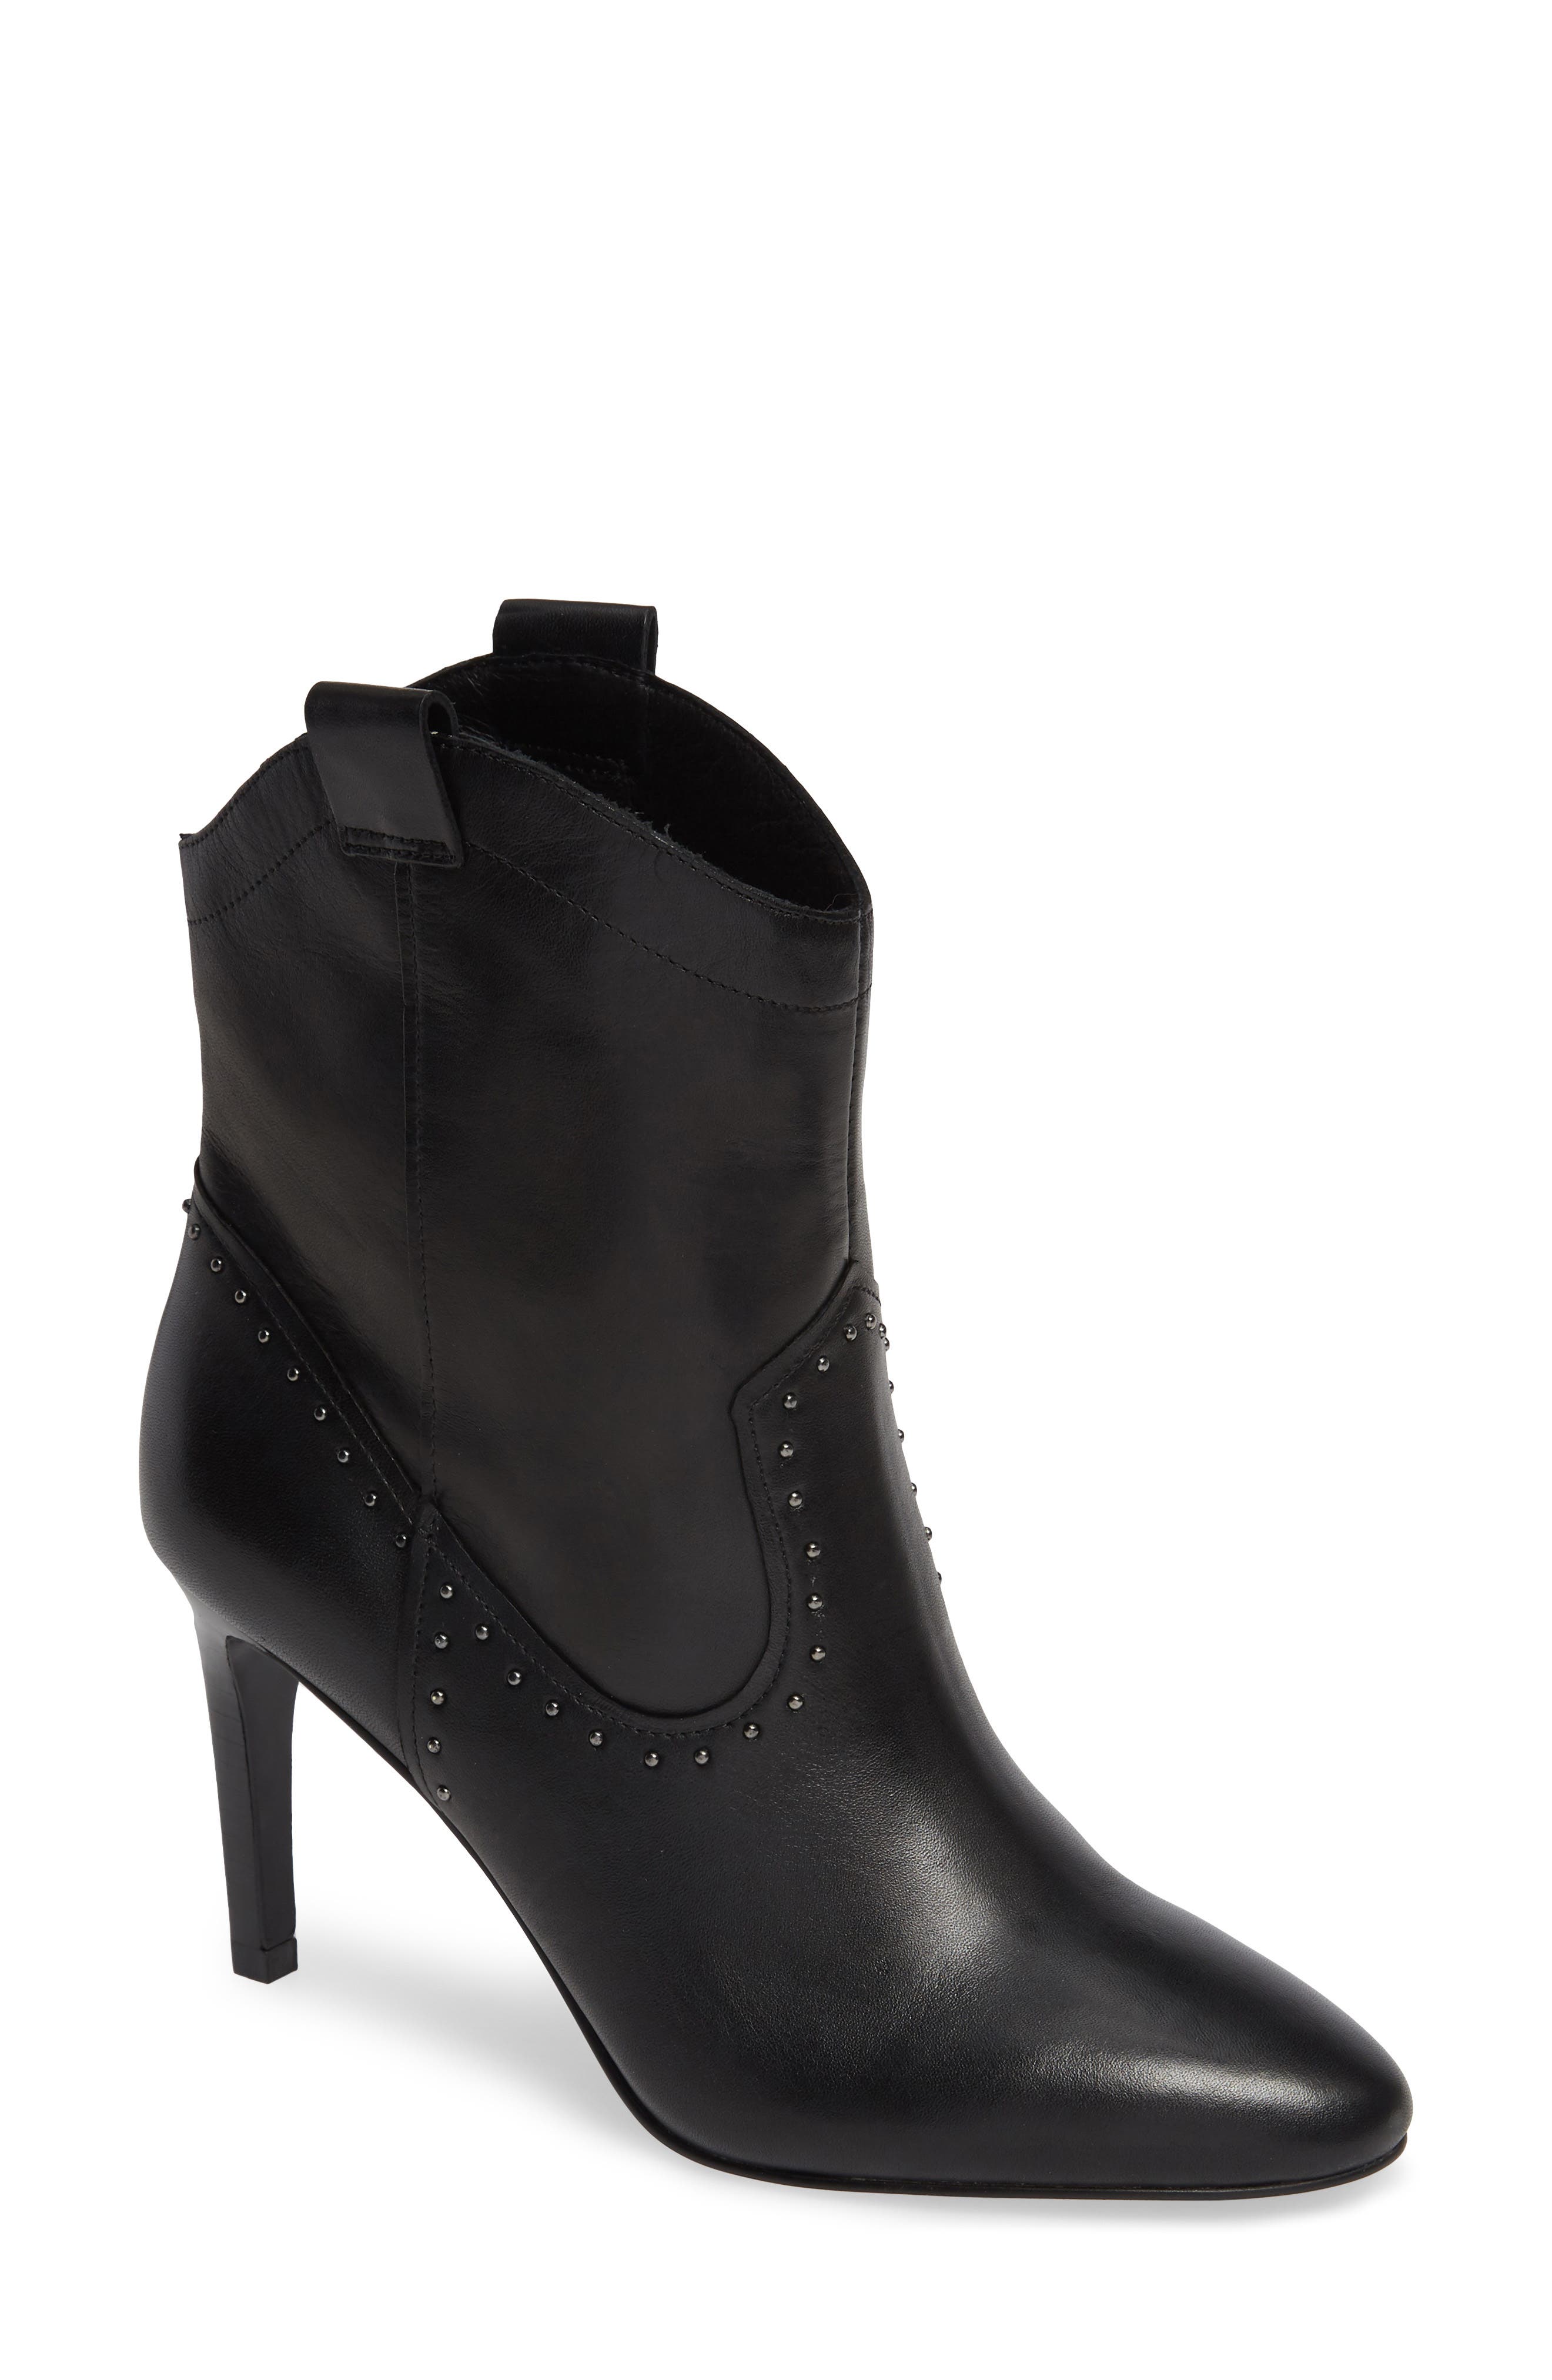 halogen leather boots